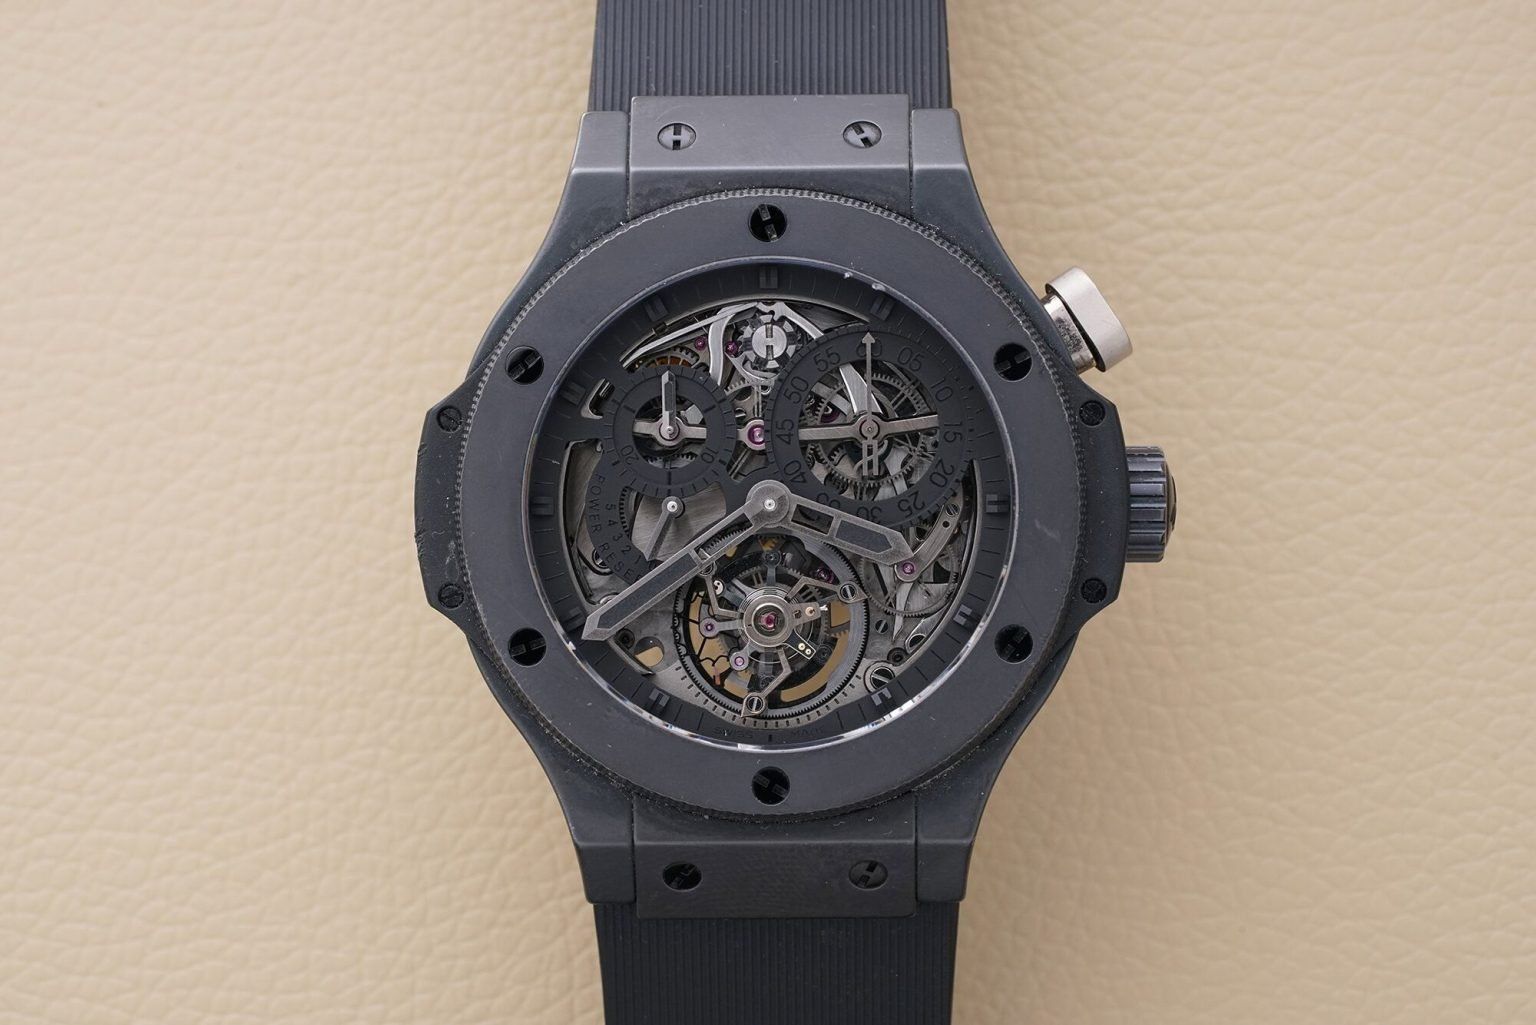 Hublot Bigger Bang All Black Tourbillon Chronograph 'Special Piece', Jean-Claude Biver’s choice for the first NFT auction of a luxury watch, source - Perpetual Passion